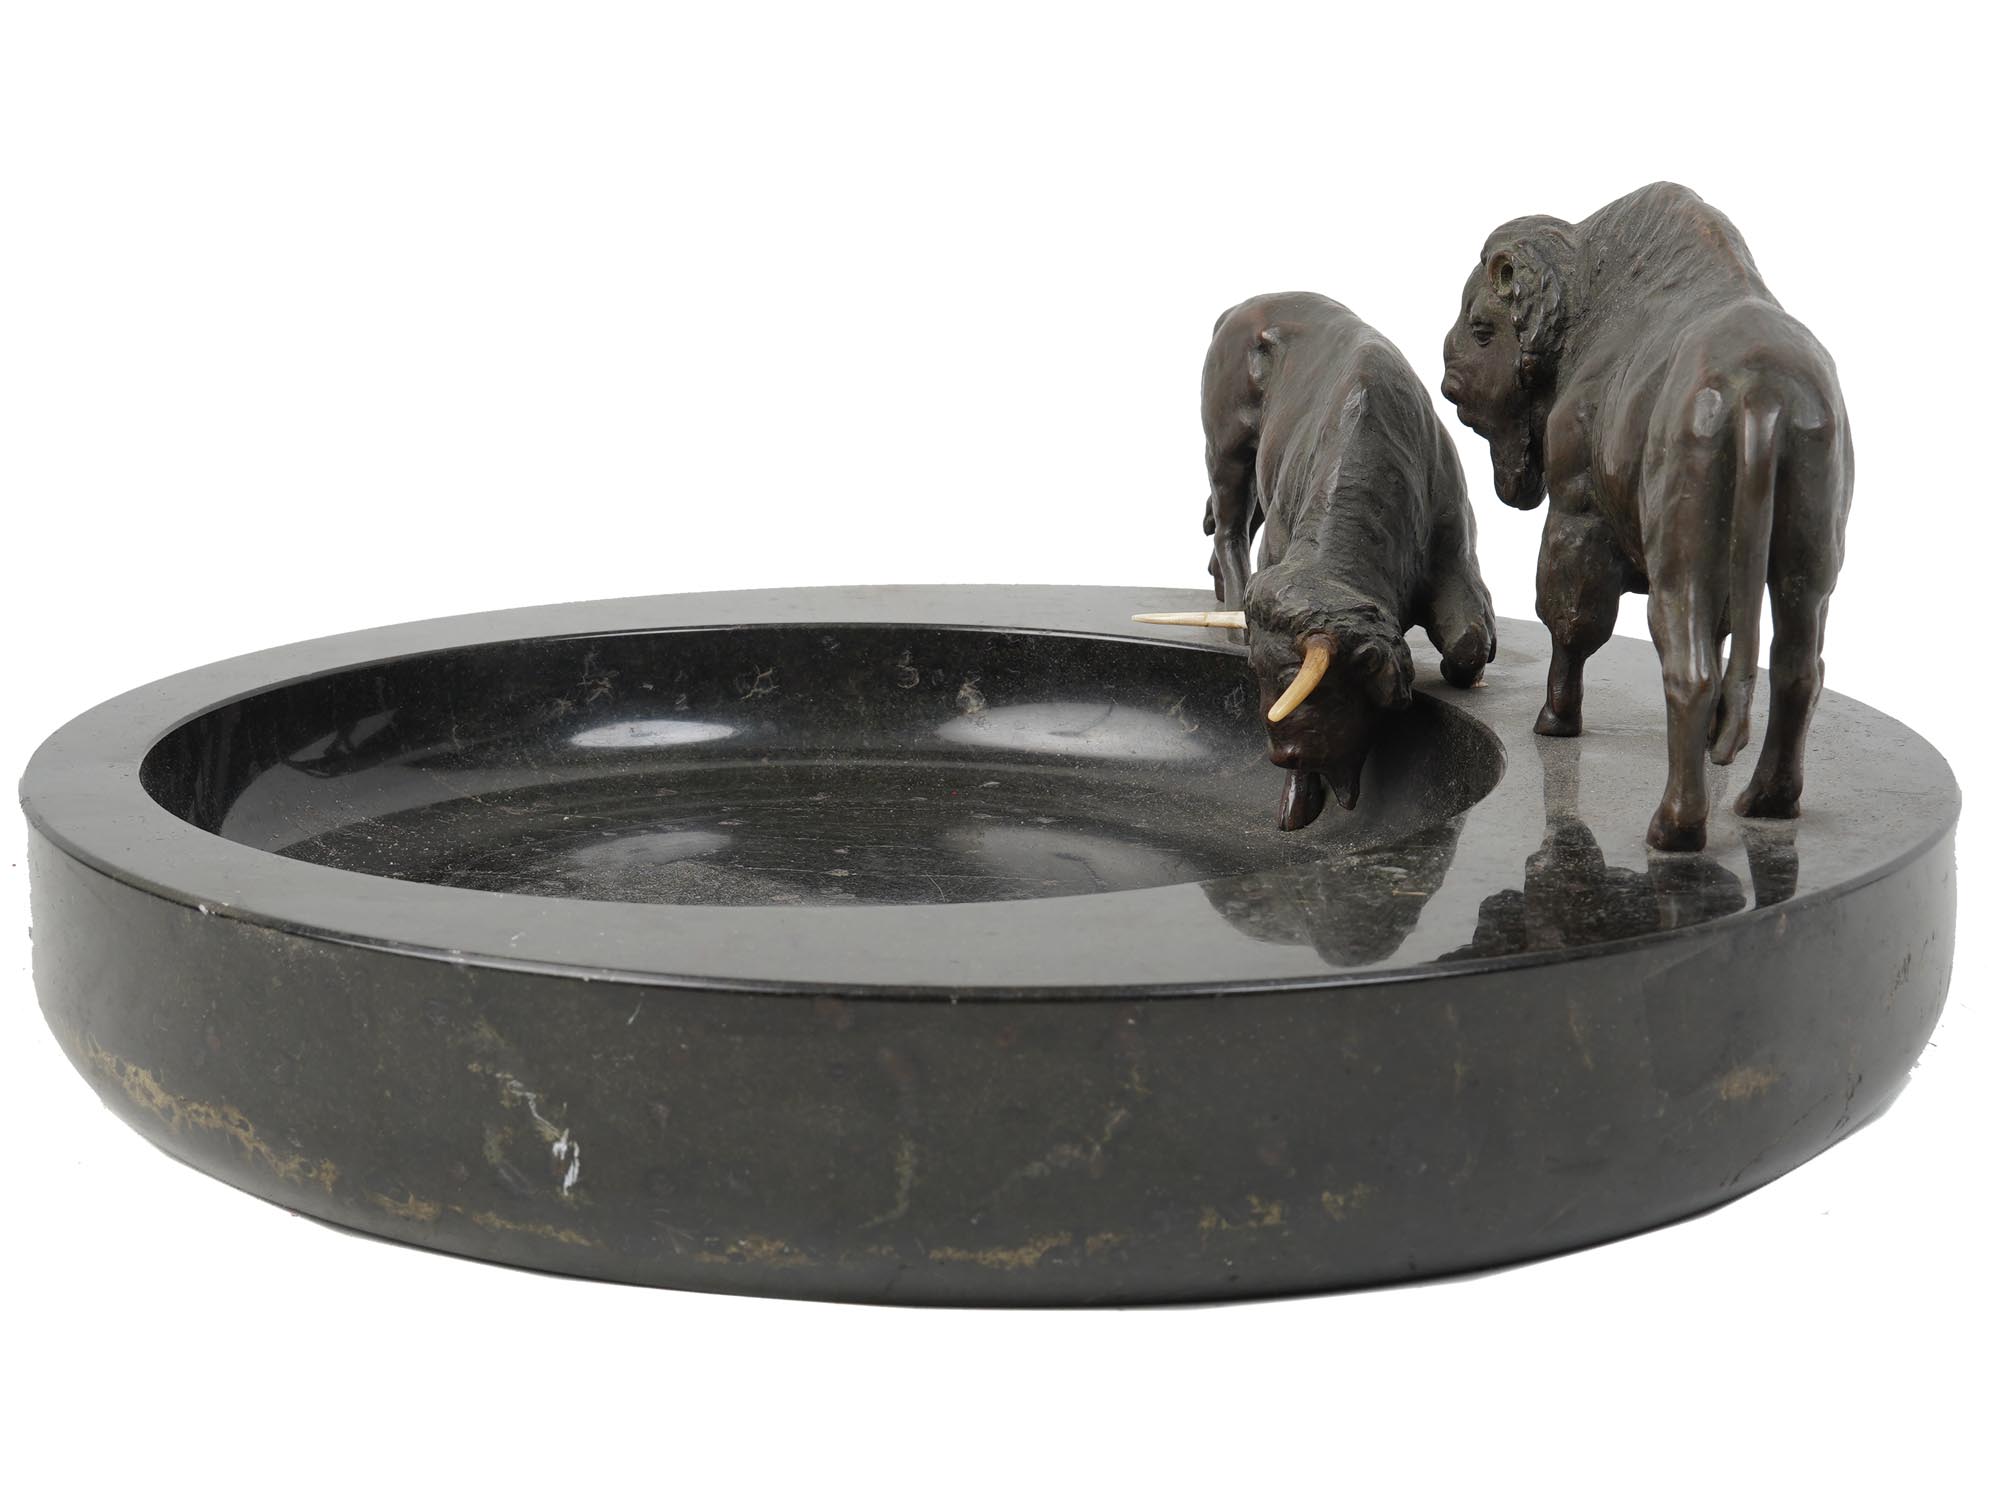 ANTIQUE ART DECO BUSINESS CARD BOWL WITH BULLS PIC-1